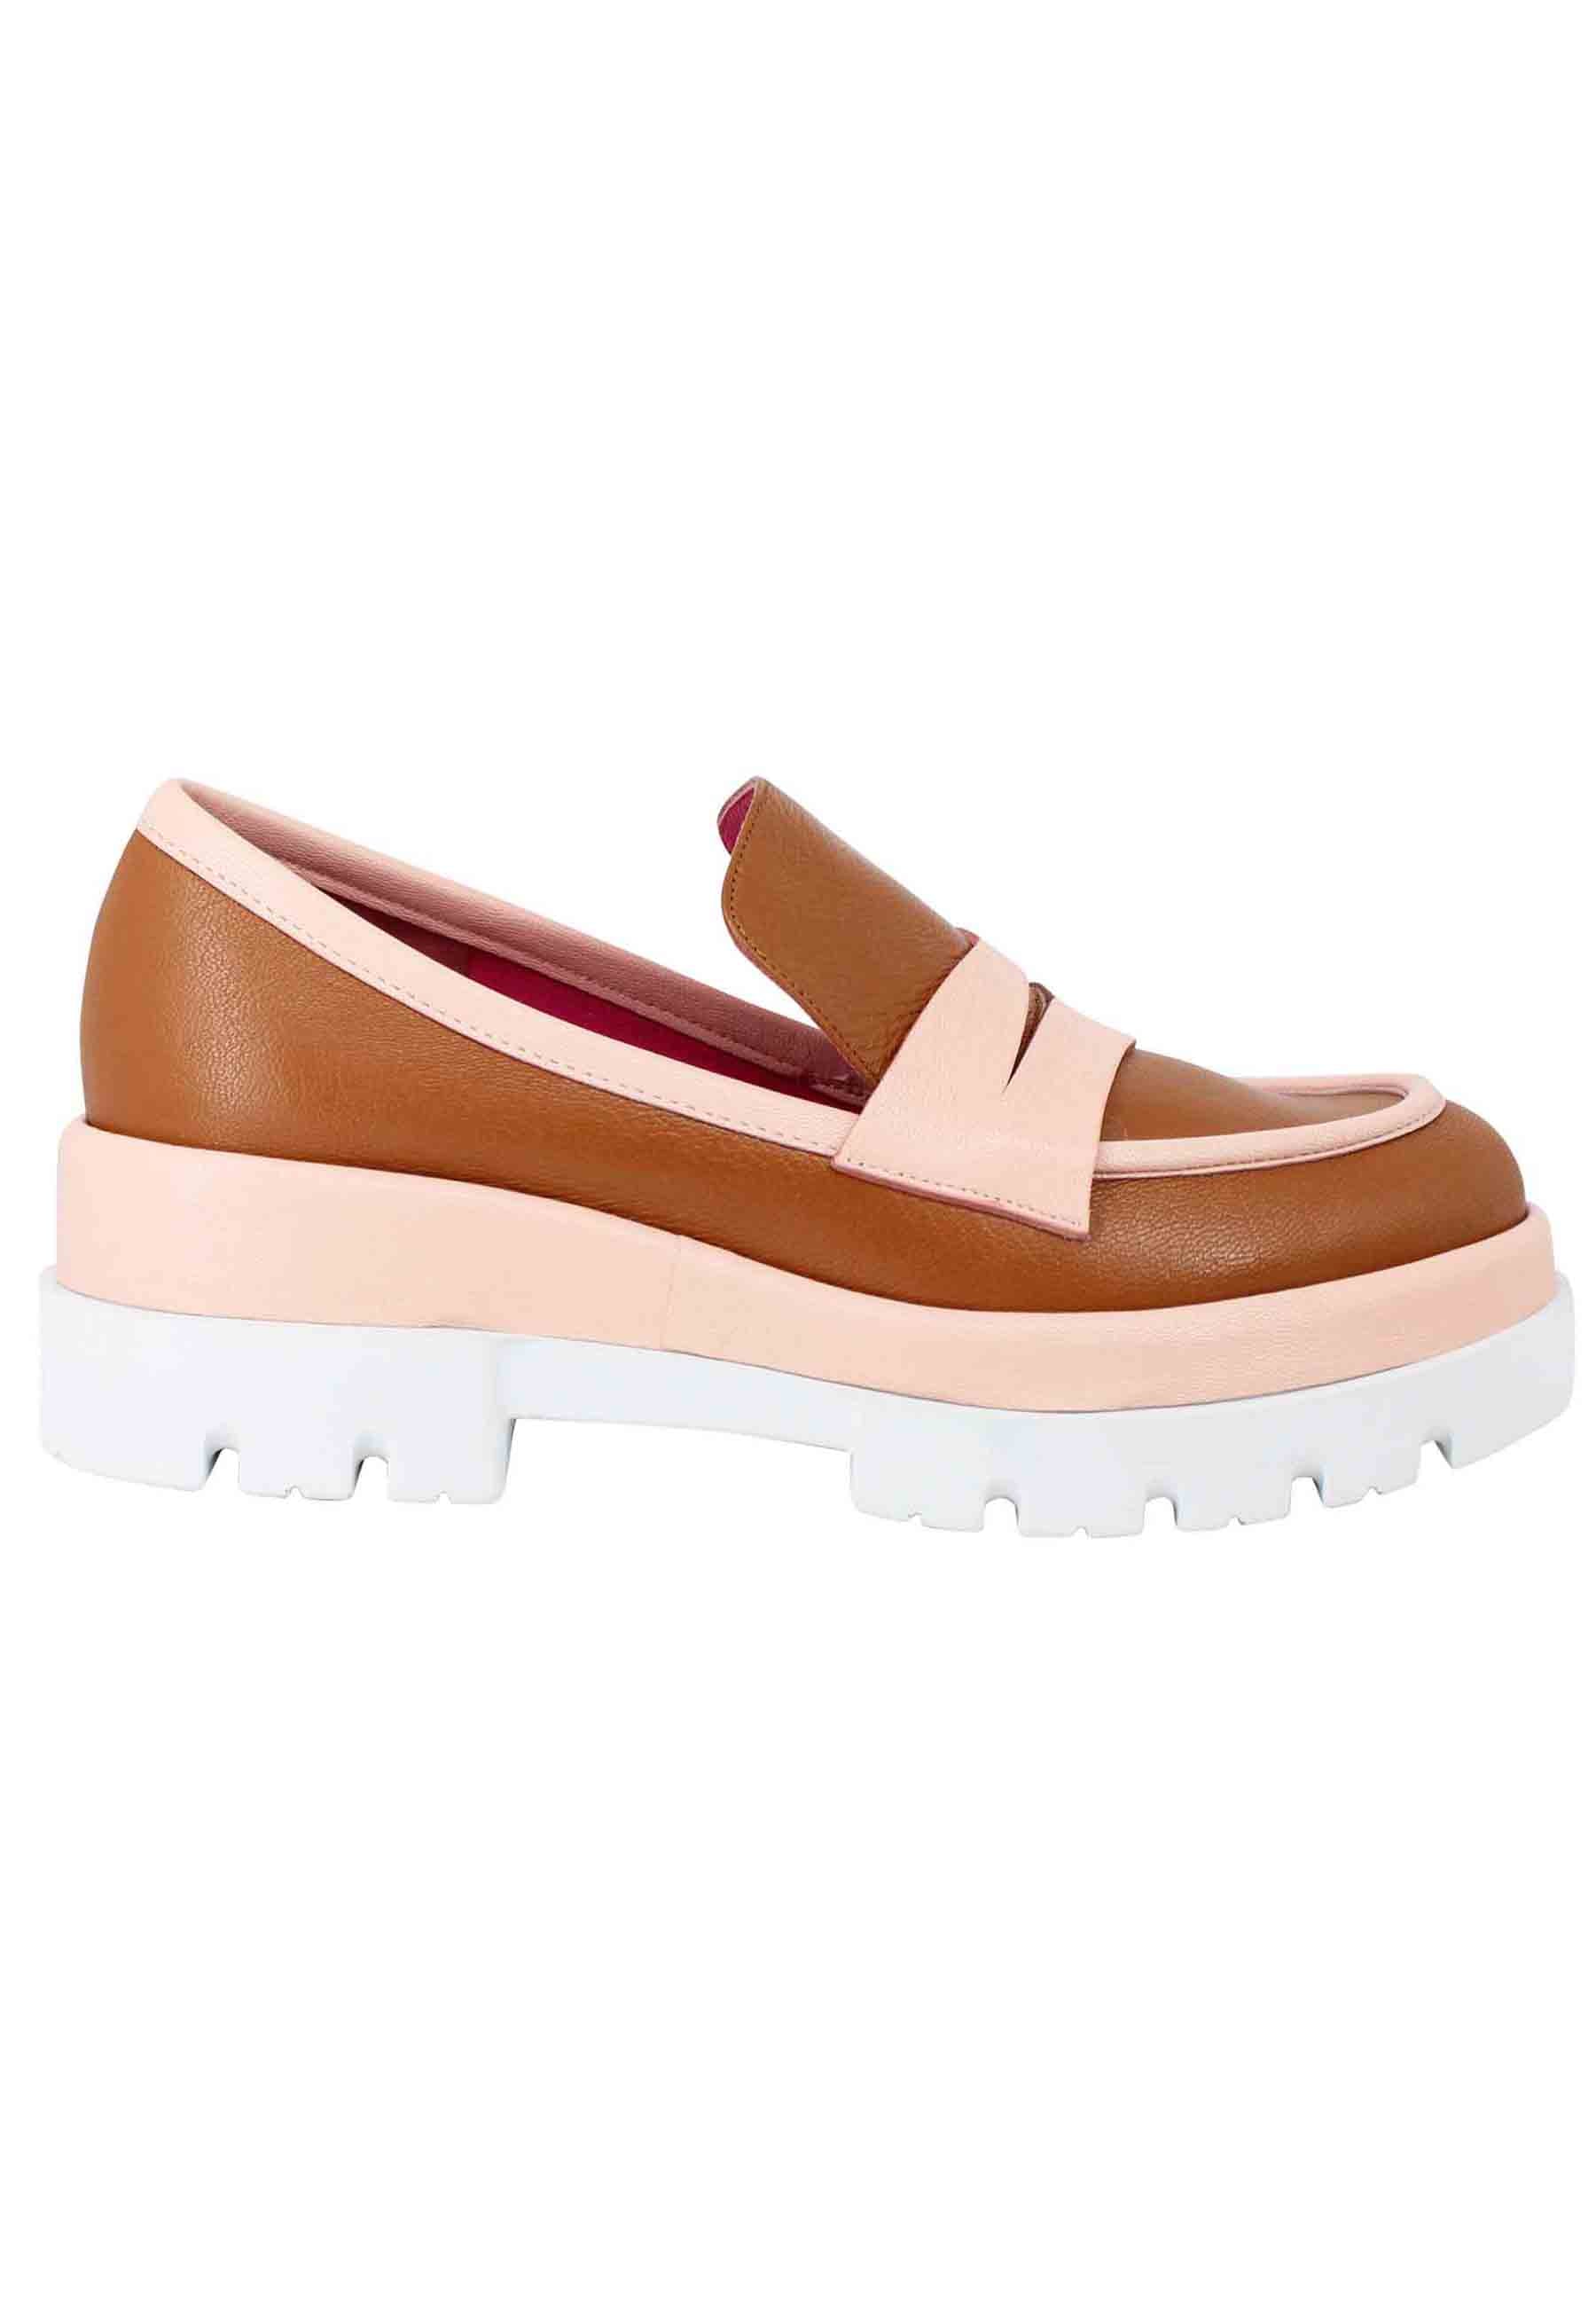 Women's moccasins in tan leather with wedge and powder leather inserts